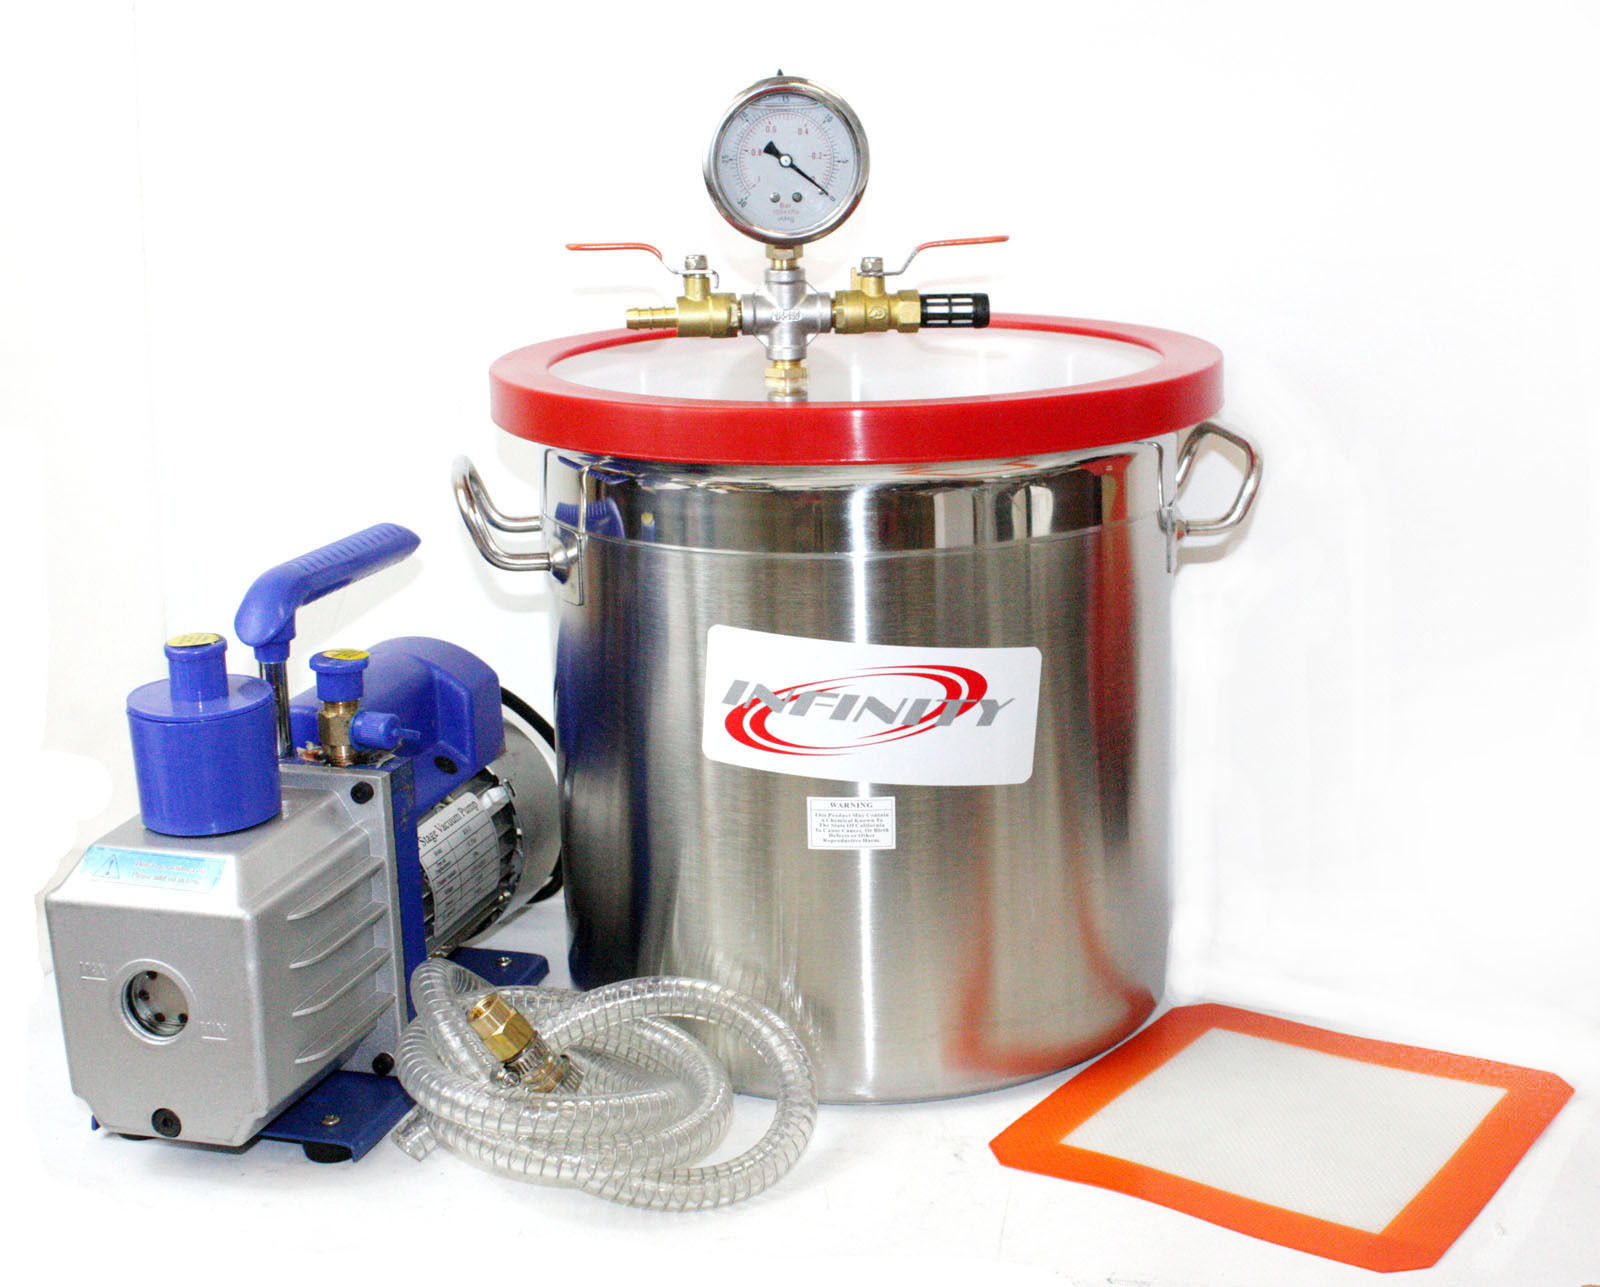 5 Gallon Vacuum Degassing Chamber Kit with 5 CFM Pump Not for Wood Stabilizing LAB1ST 